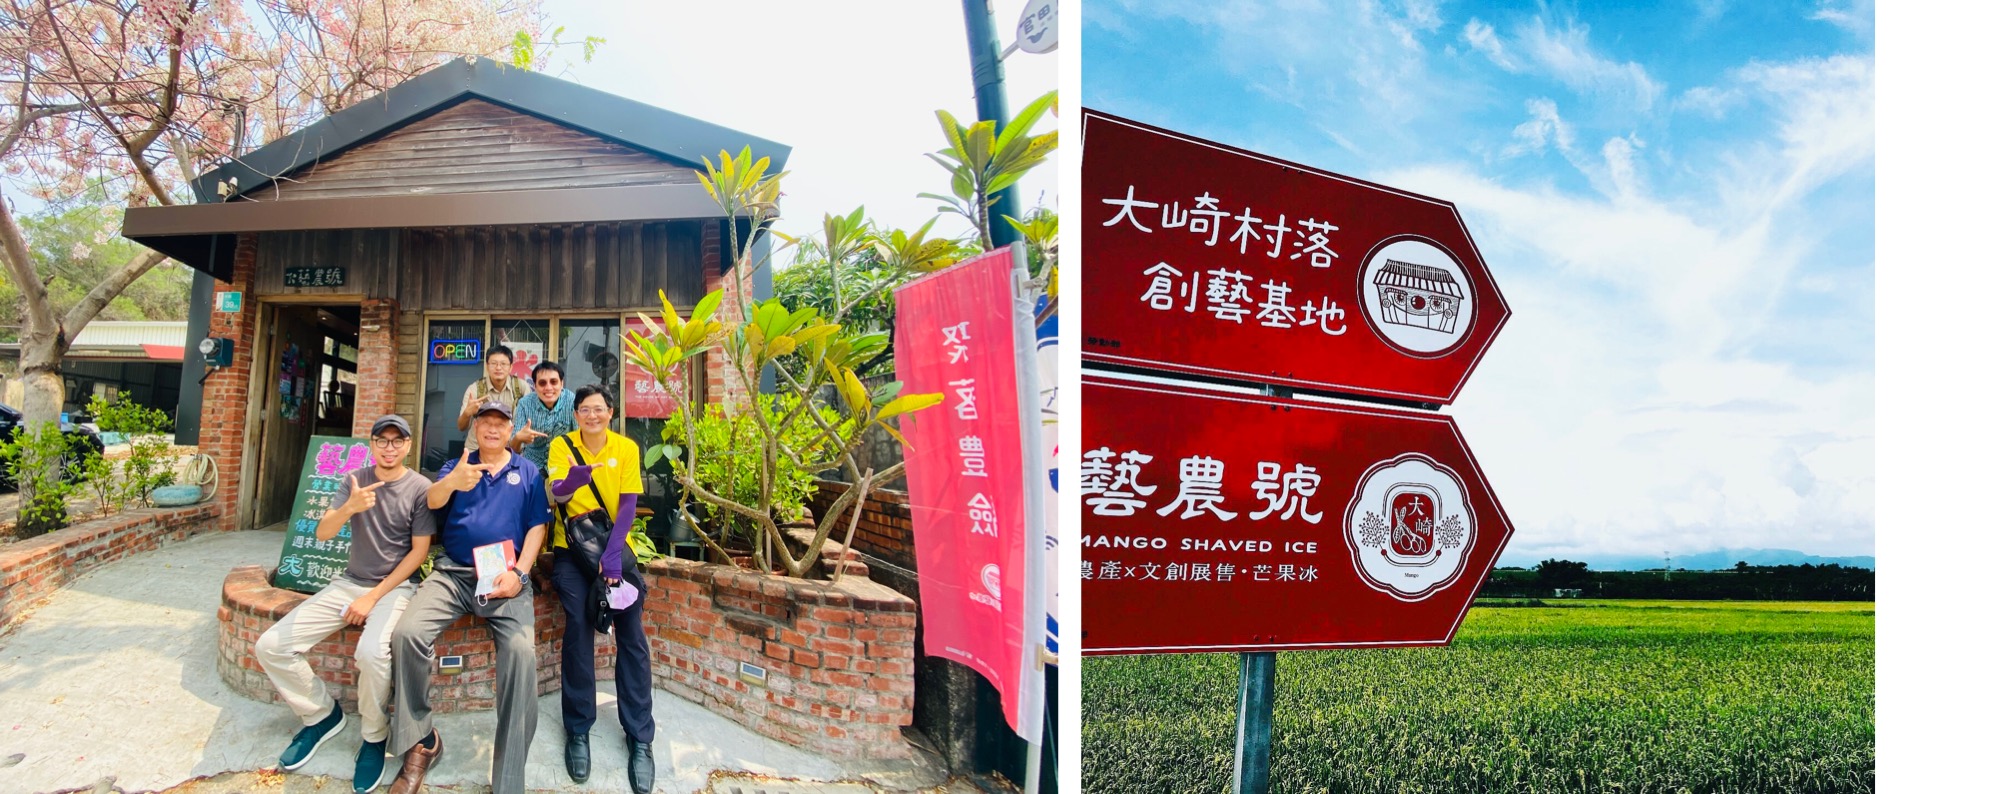 Left: Entrance of the House of Art Grower; right: signage for Batian Road